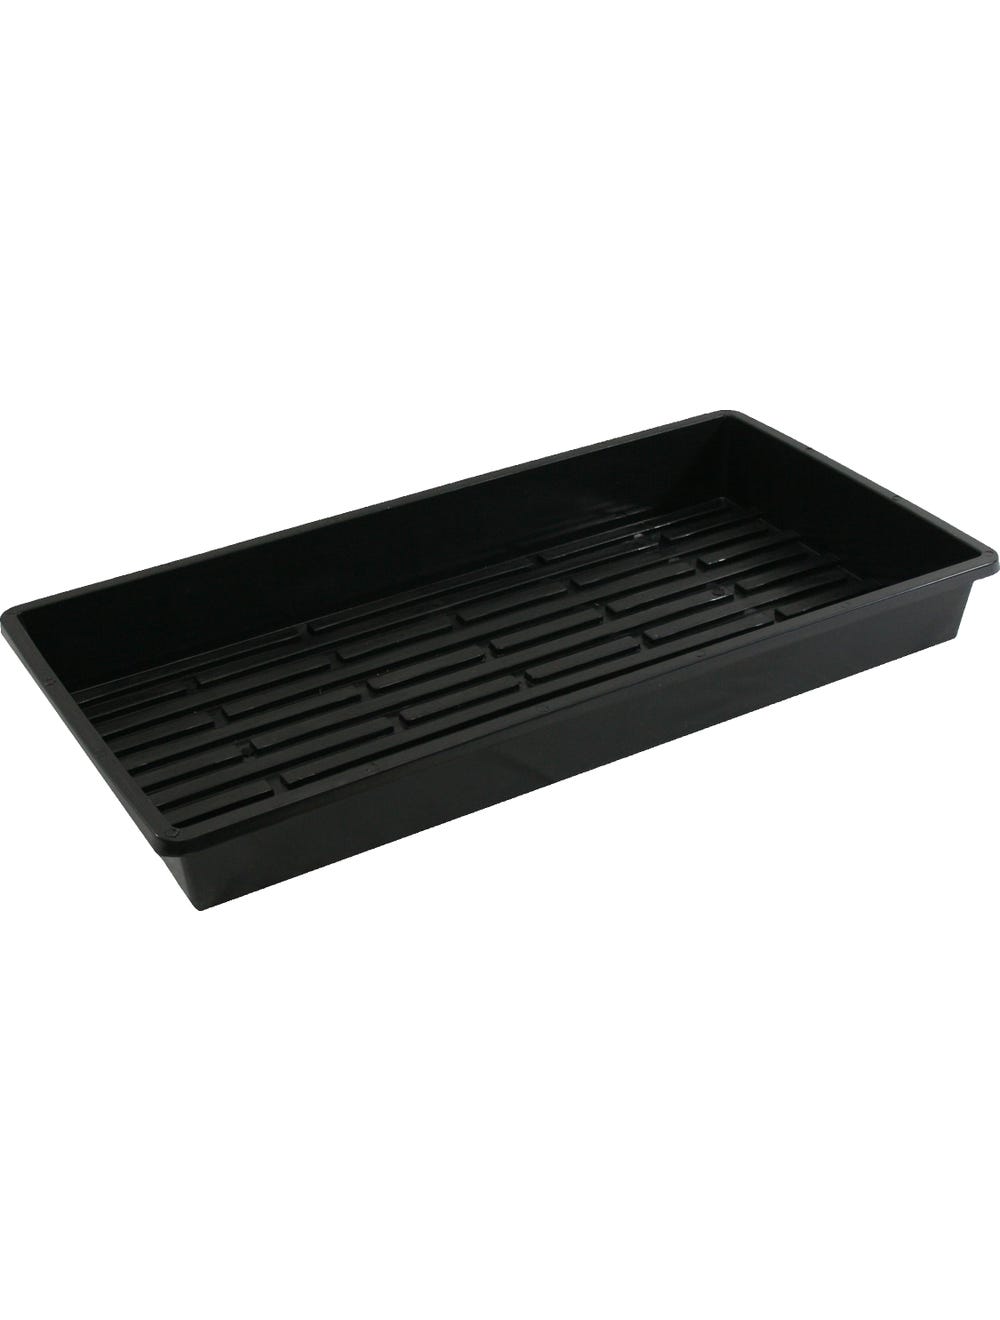 Product Image:SunBlaster 1020 Quad Thick Tray